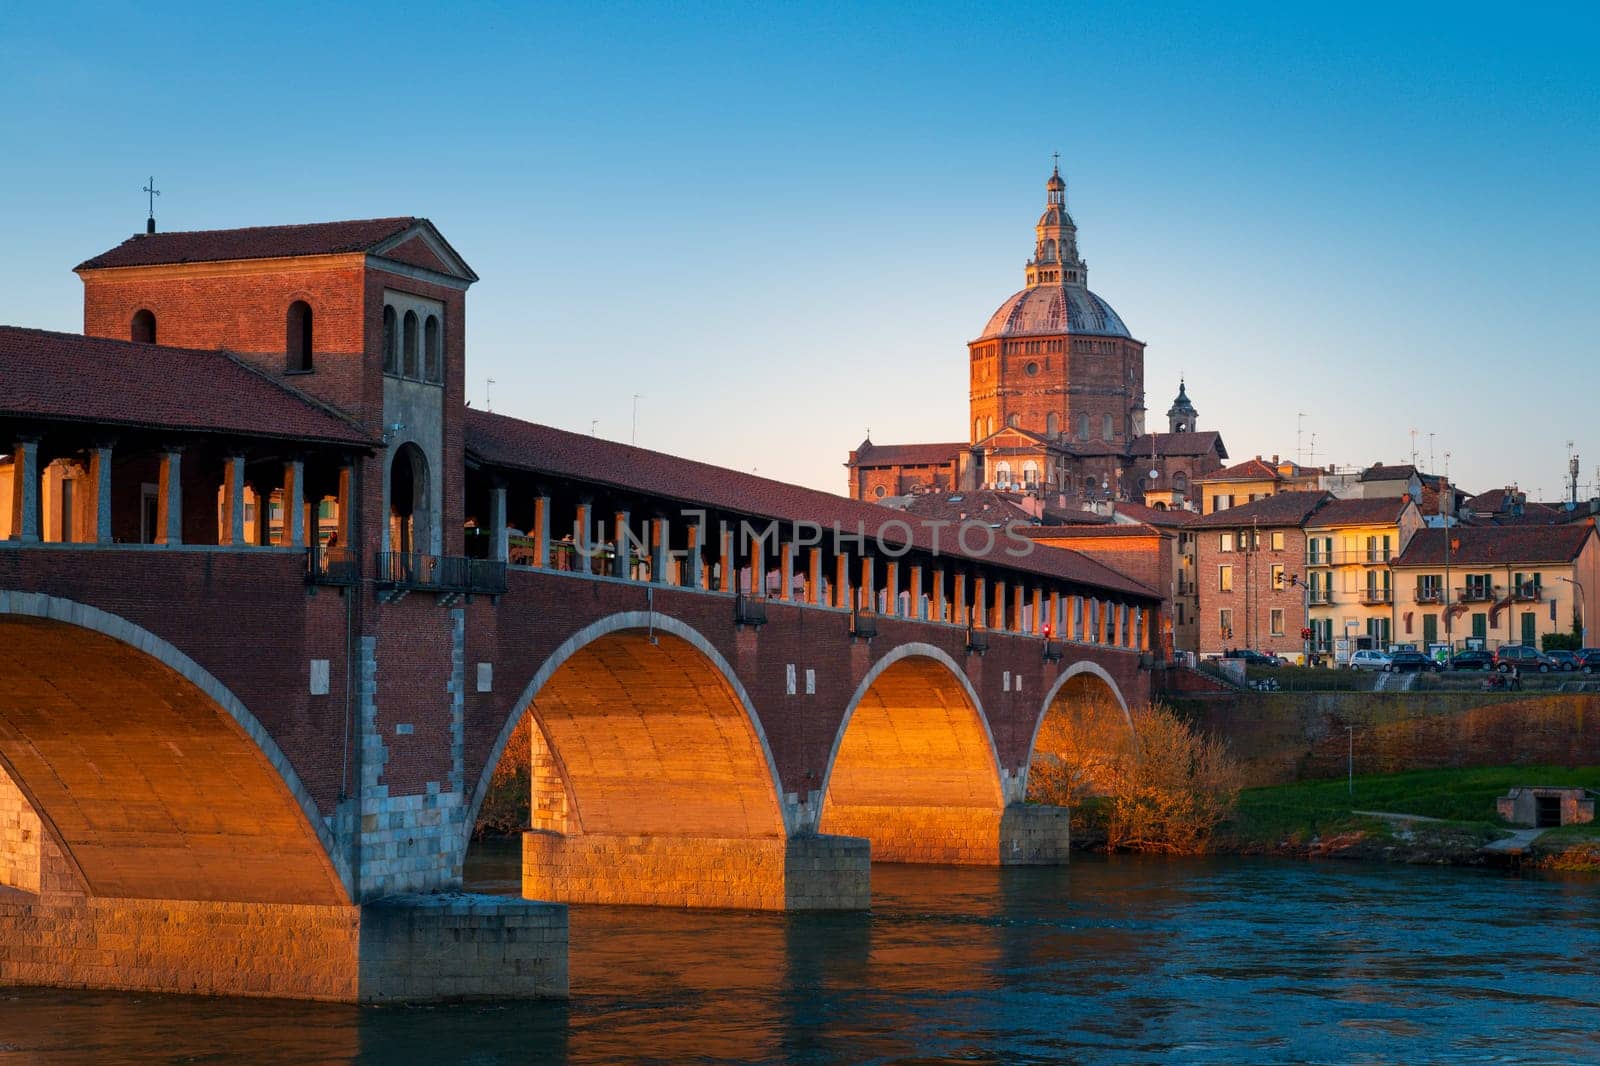 Panorama of covered bridge and Pavia cathedral at sunset by Robertobinetti70